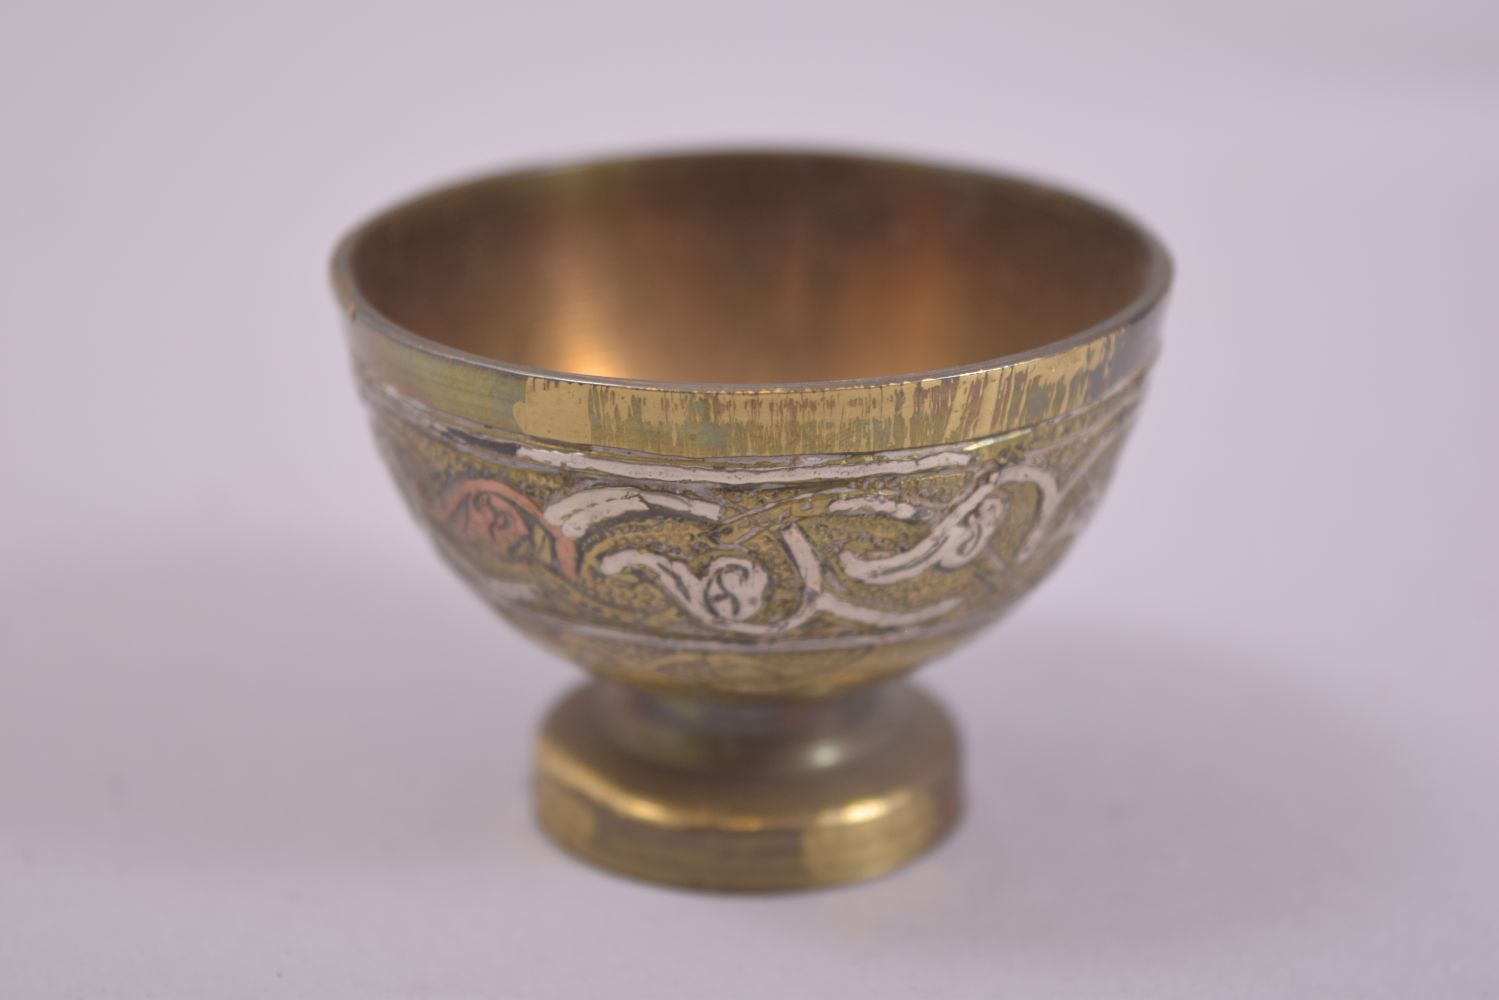 FIVE 19TH CENTURY SYRIAN SILVER AND COPPER OVERLAID PEDESTAL CUPS, diameter 5.5cm. - Image 5 of 8